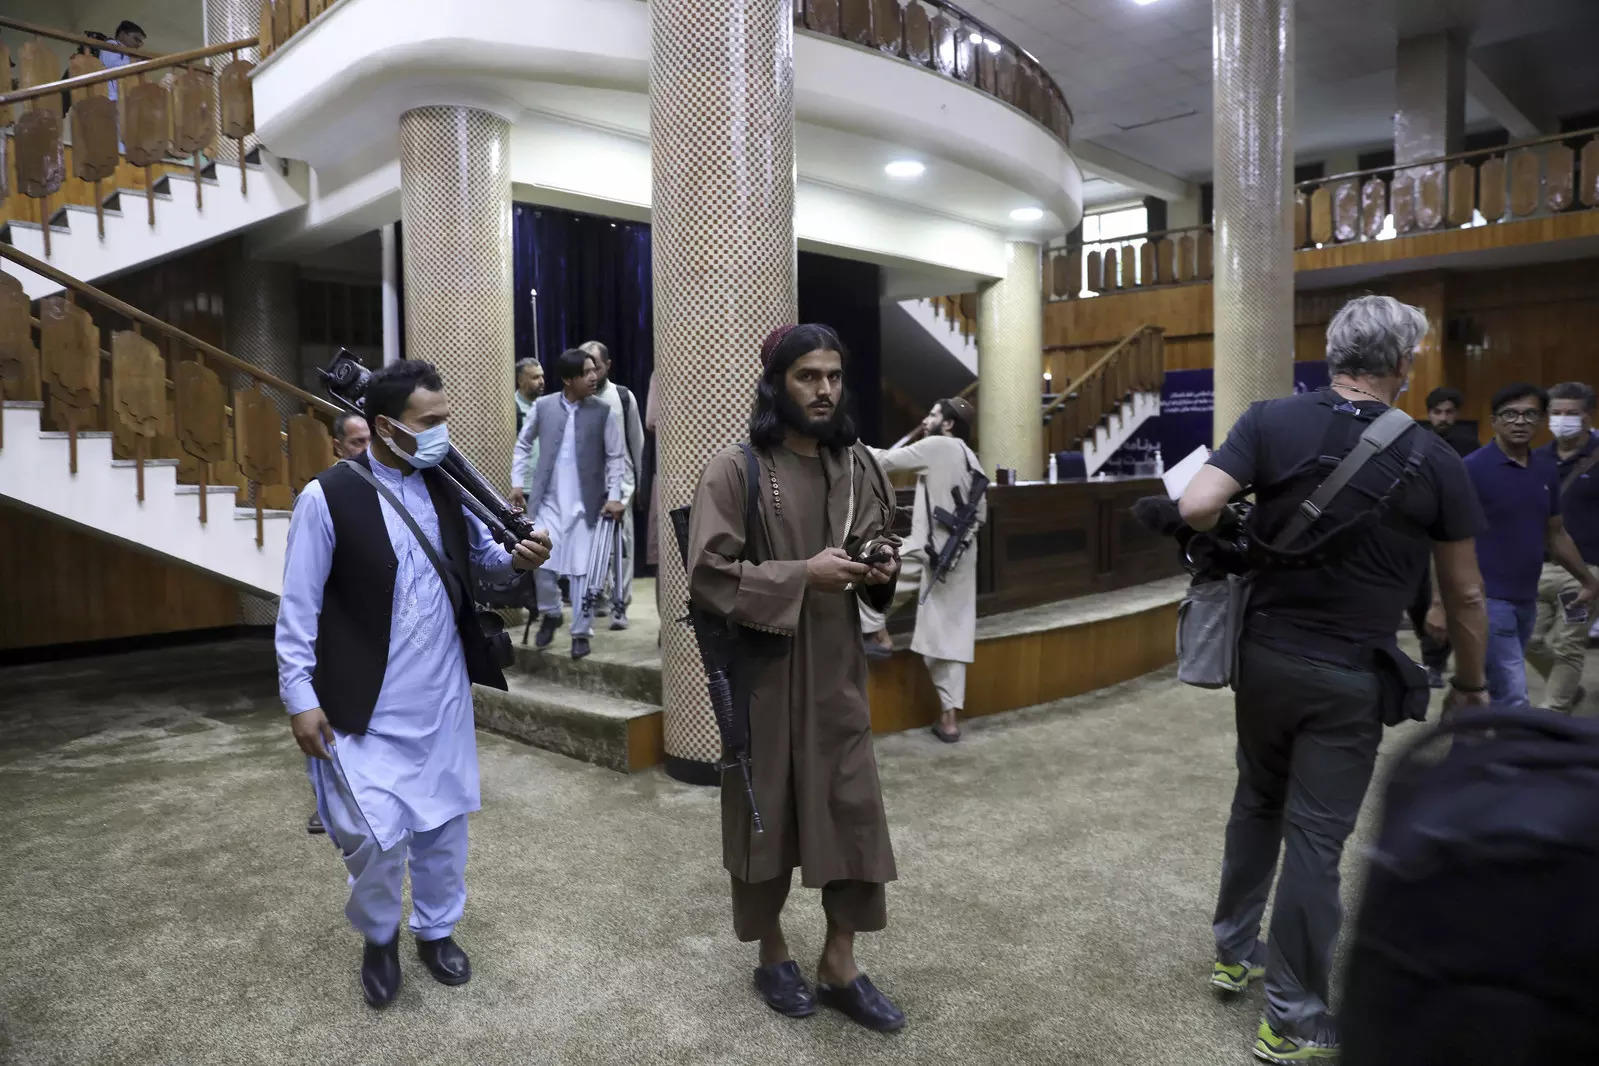 Taliban fighters stand guard before the Taliban spokesman Zabihullah Mujahid arrives for his first news conference in Kabul